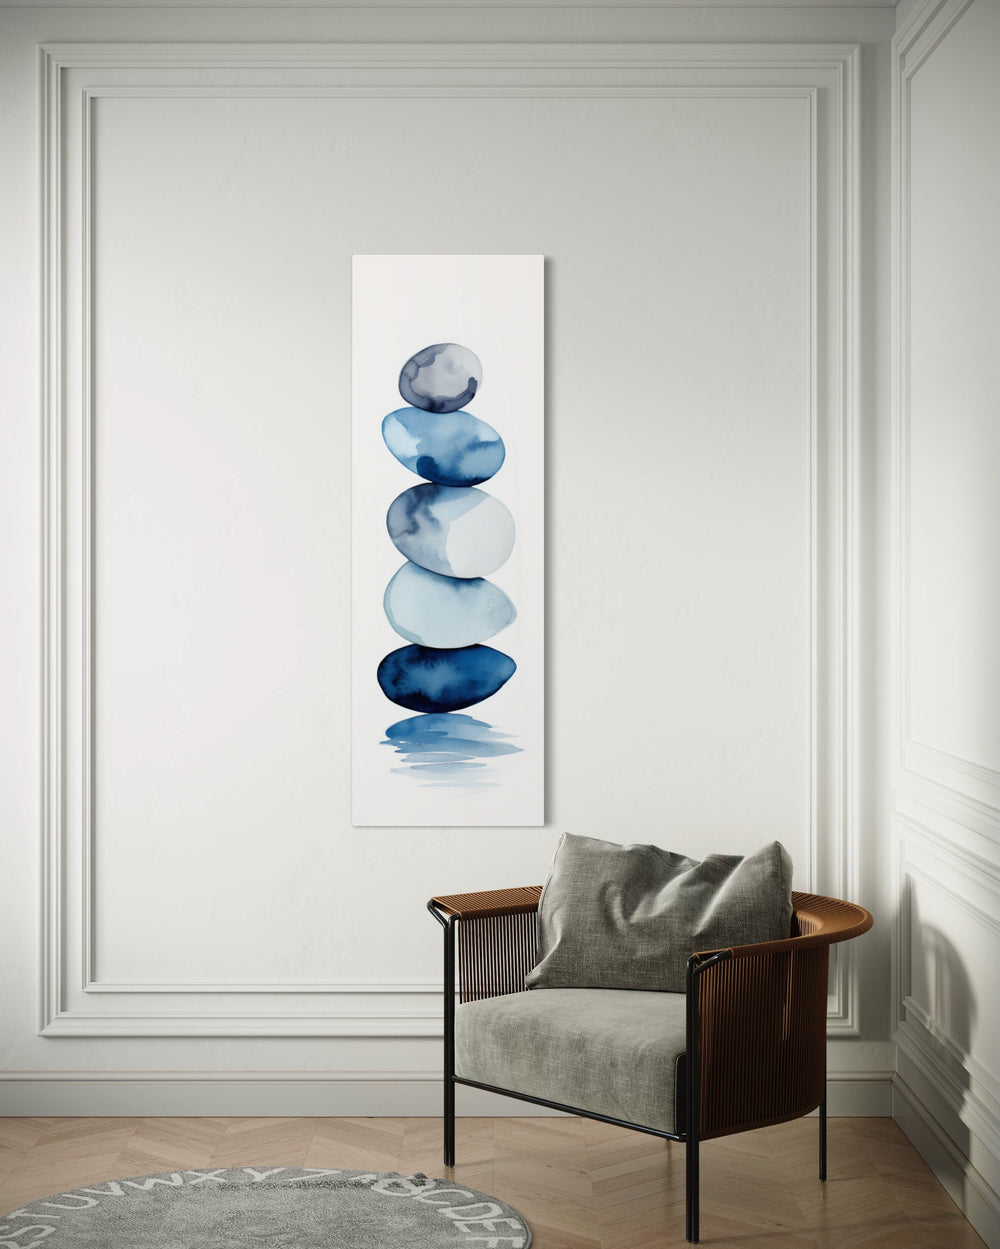 Tall Narrow Navy Blue White Stacked Rocks Vertical Wall Art behind armchair